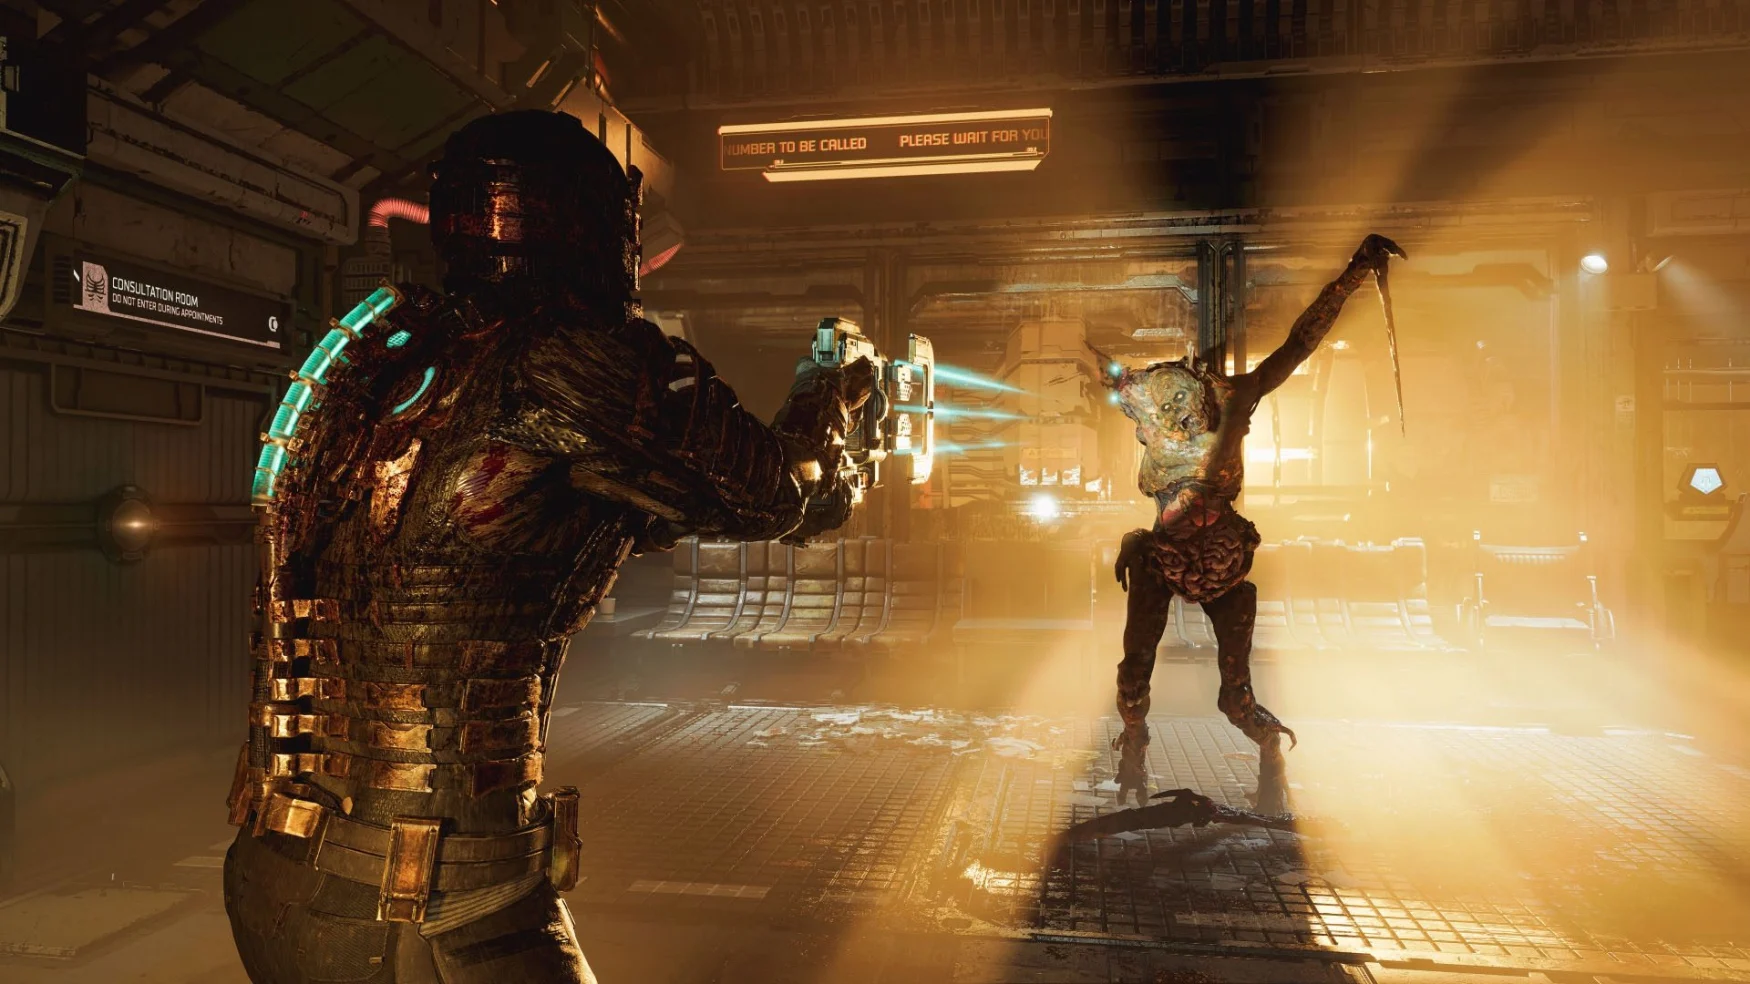 Dead Space protagonist Isaac Clarke points his weapon at a necromorph who stands in menacing silhouette against the starship's harsh light.